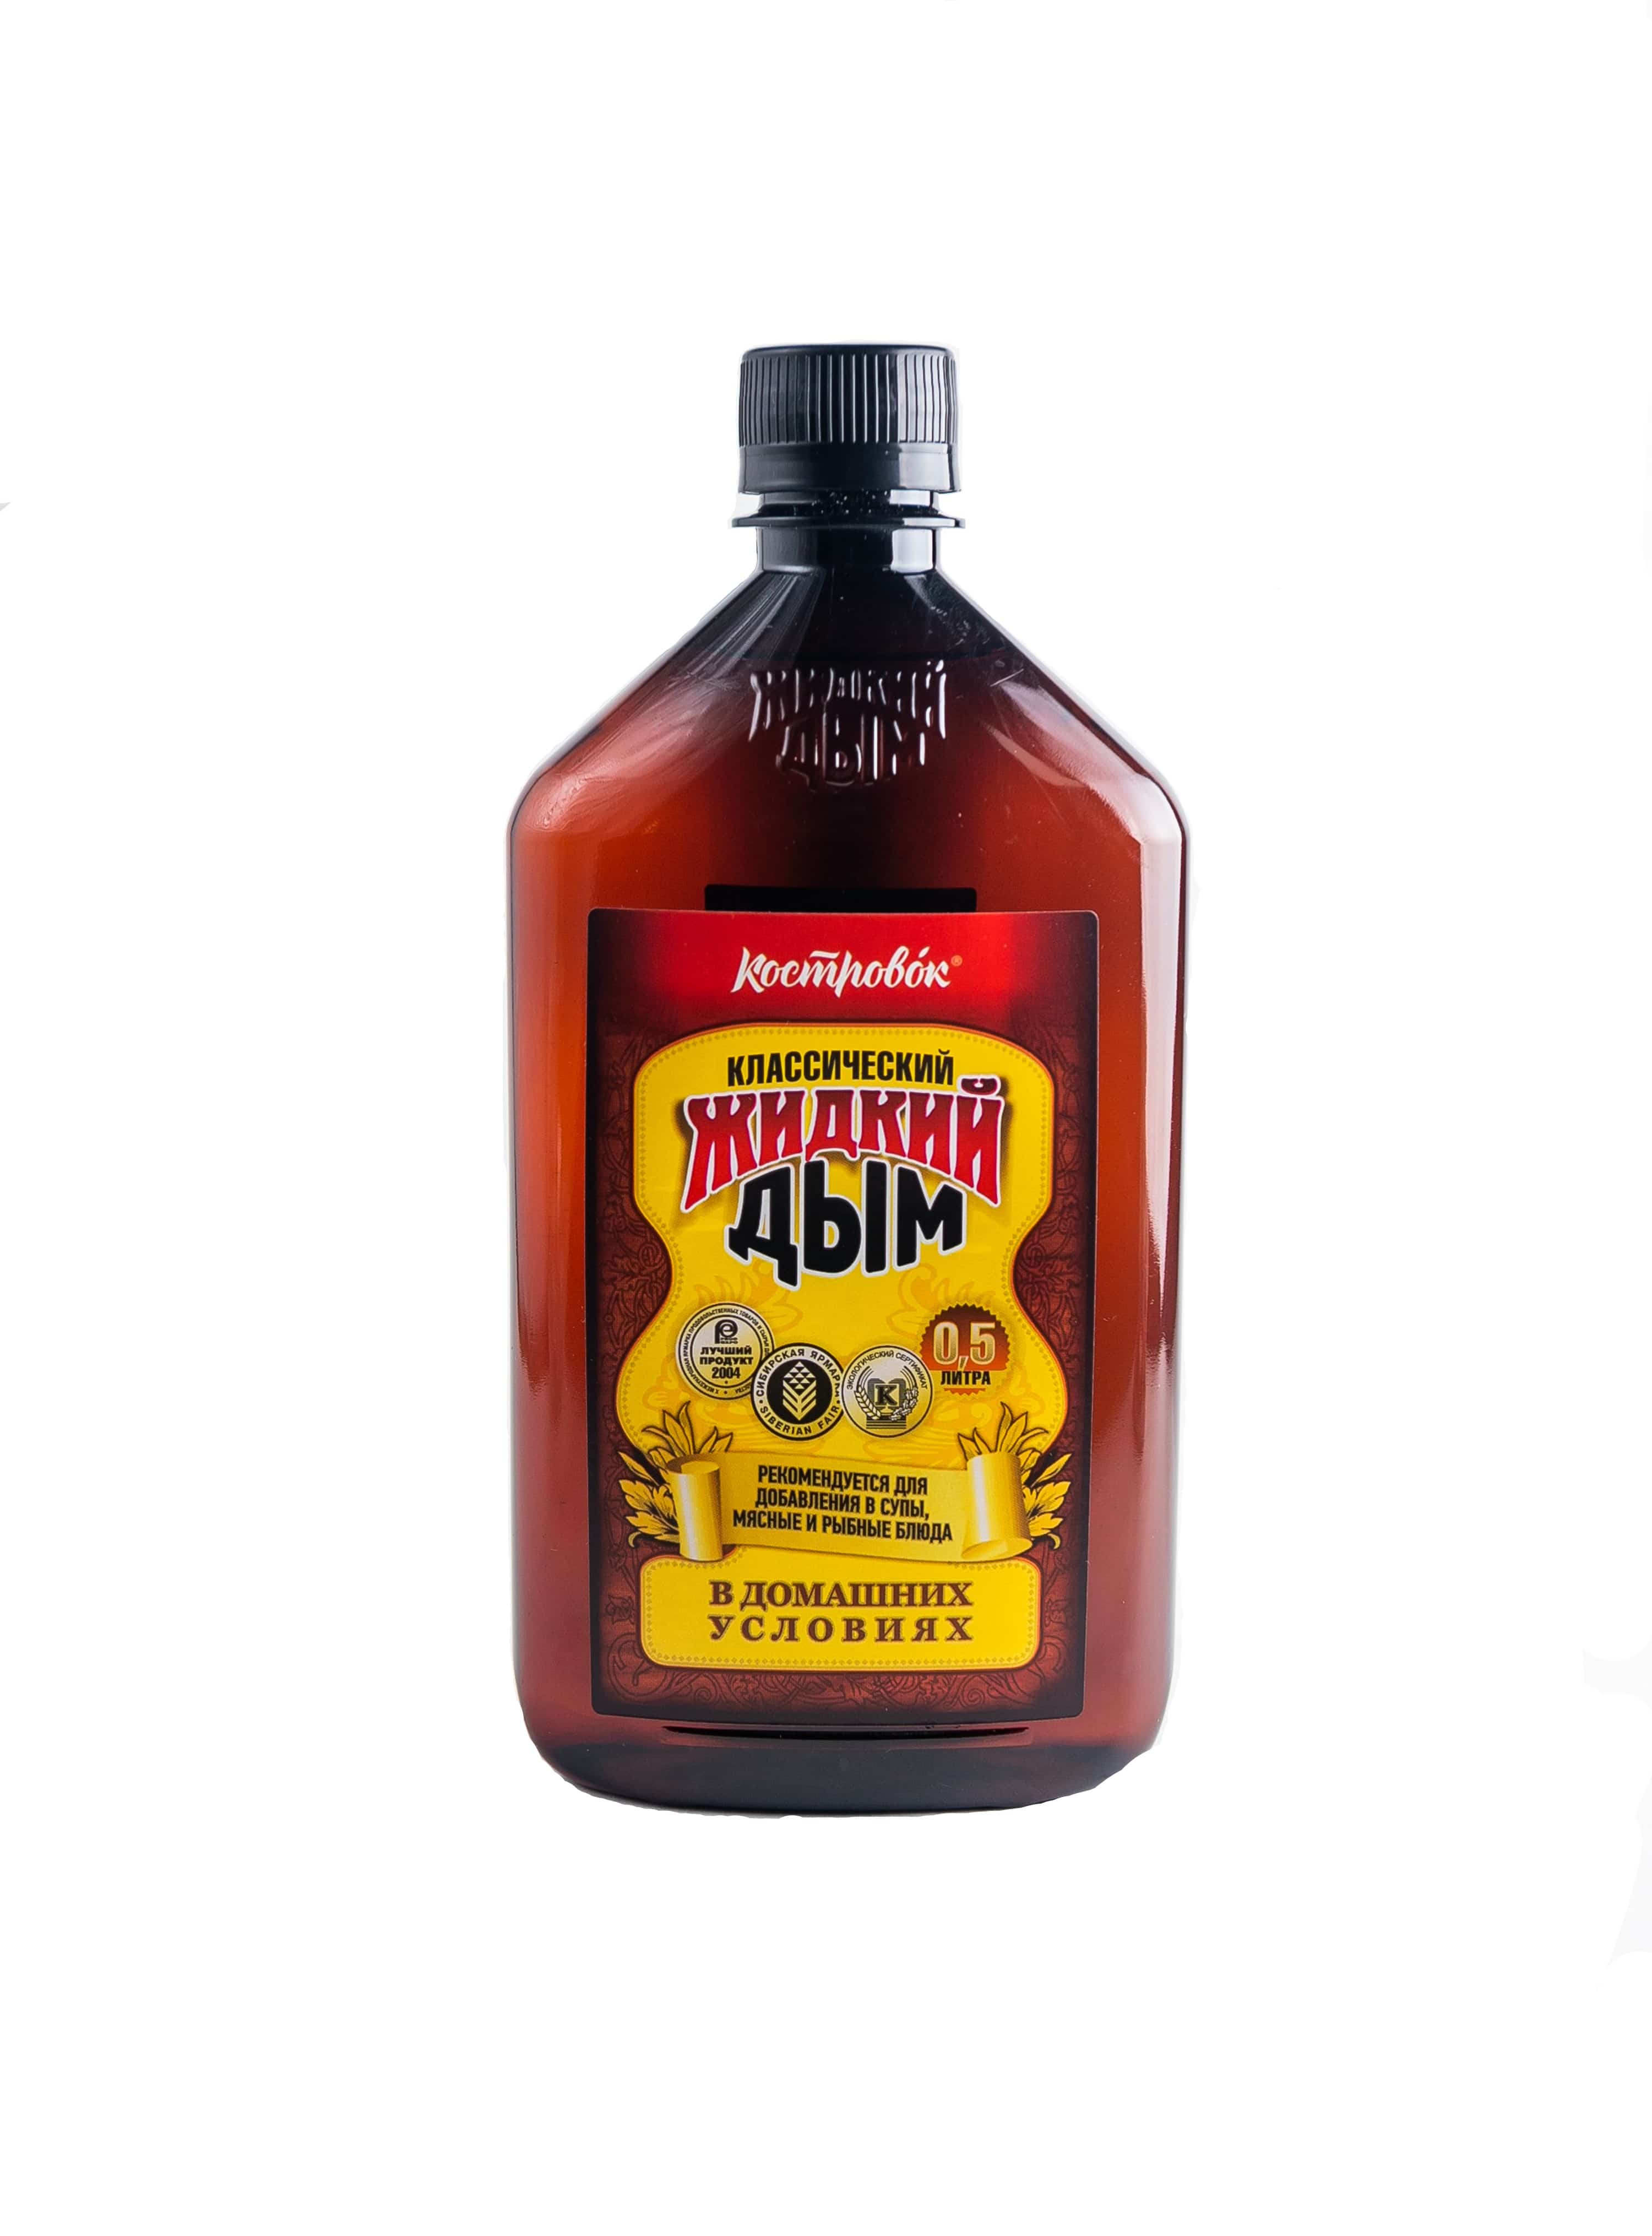 Liquid smoke kostrovok is a liquid that gives as much flavor to various dishes.